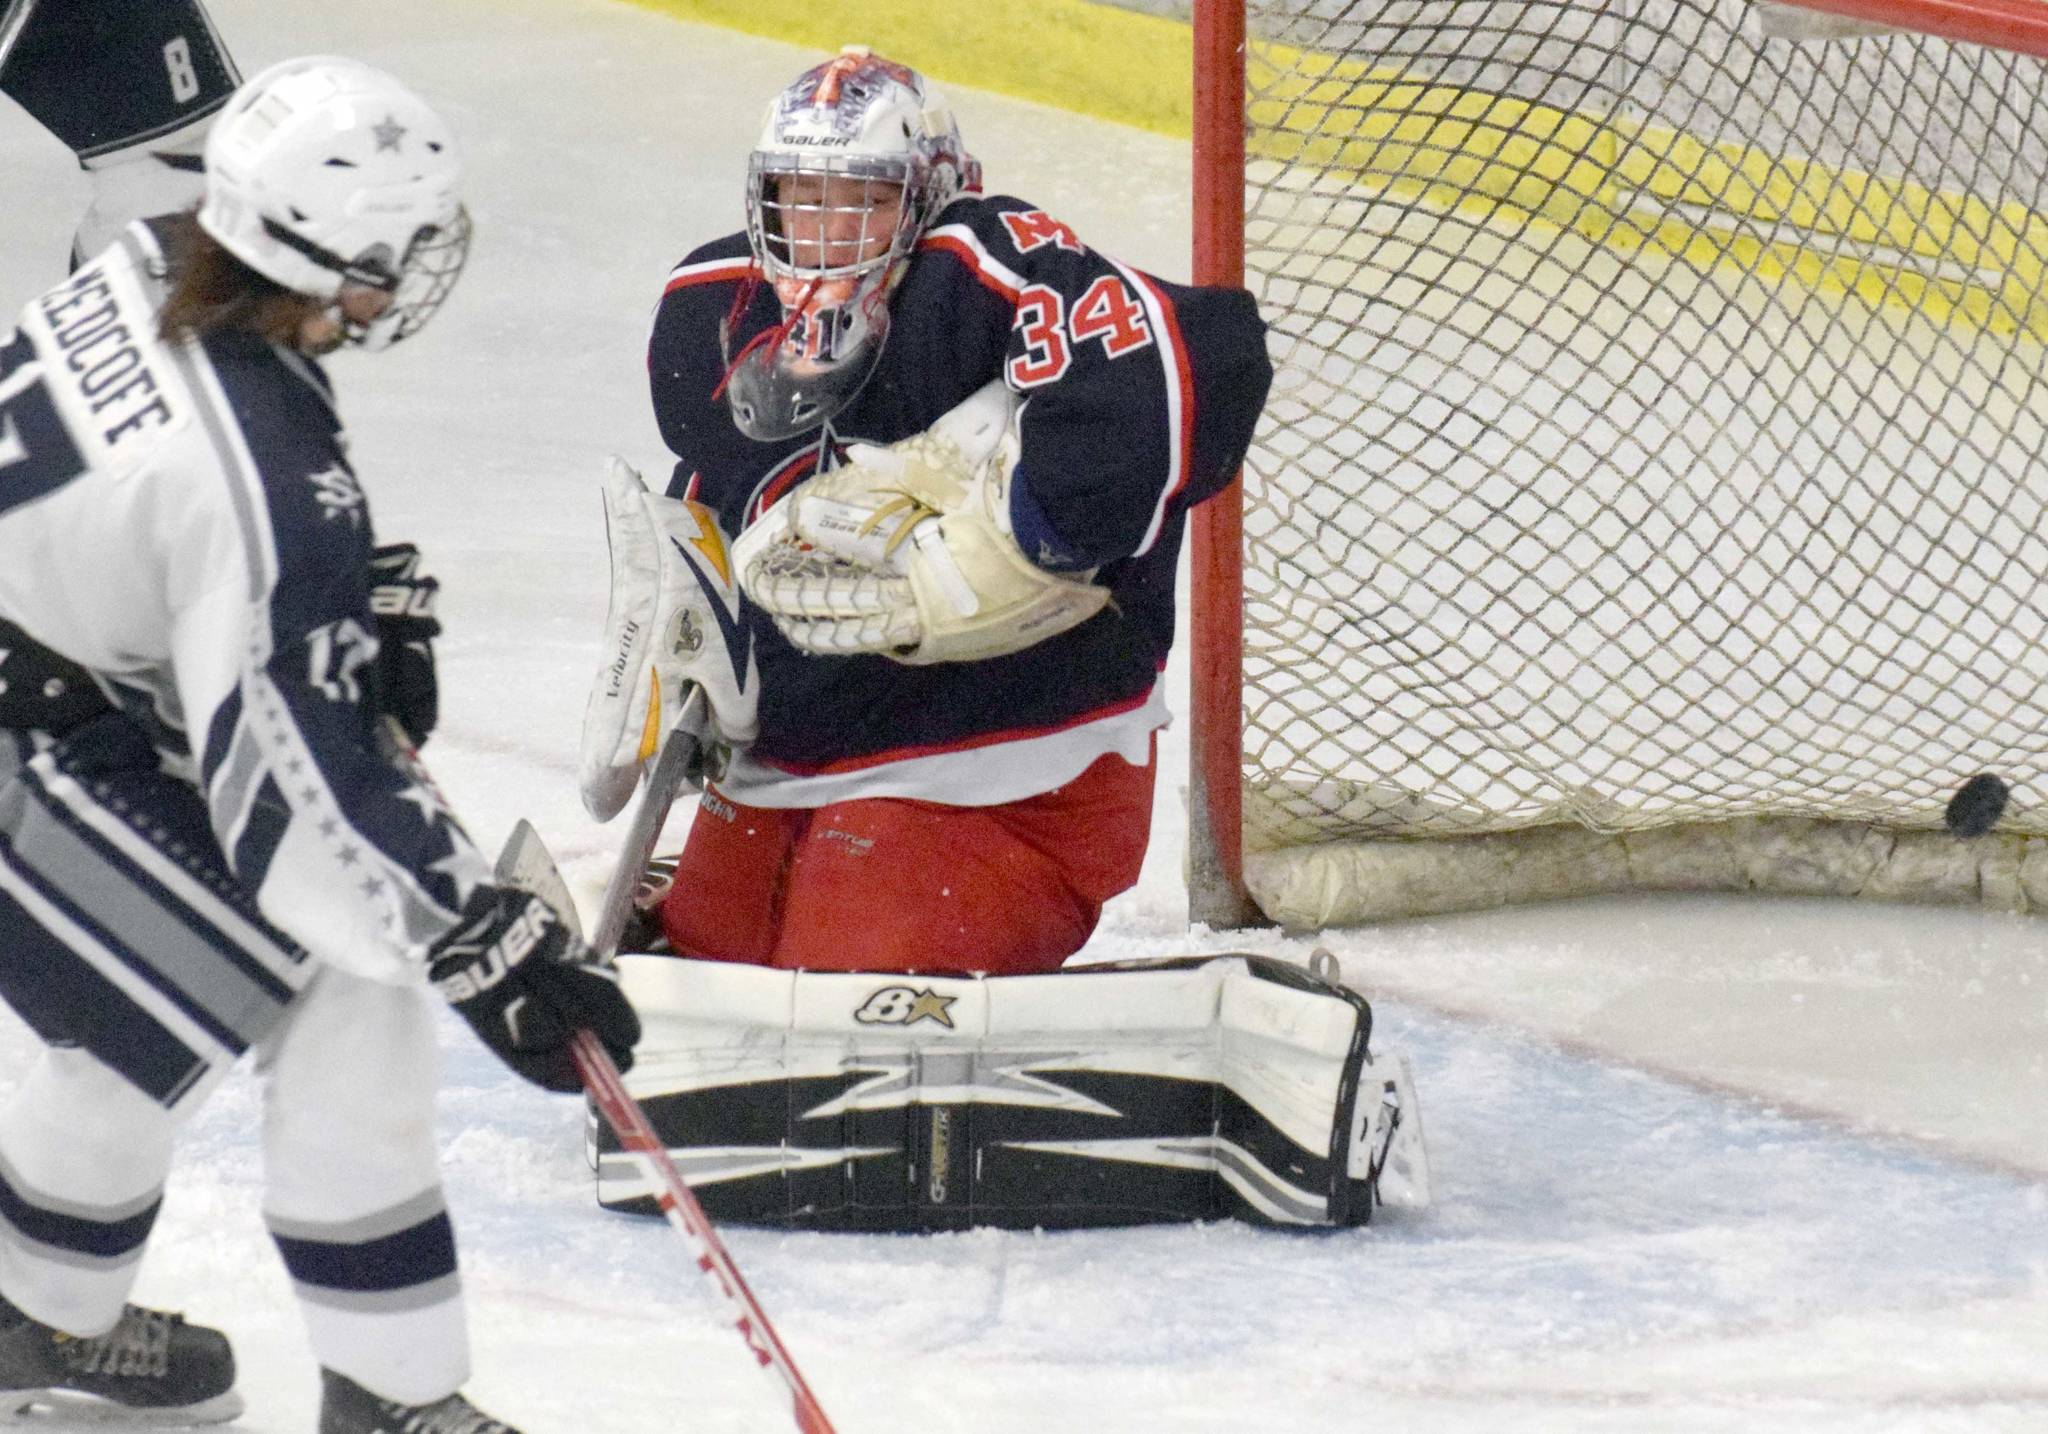 North Pole freshman goalie makes 76 saves in debut to tie Soldotna